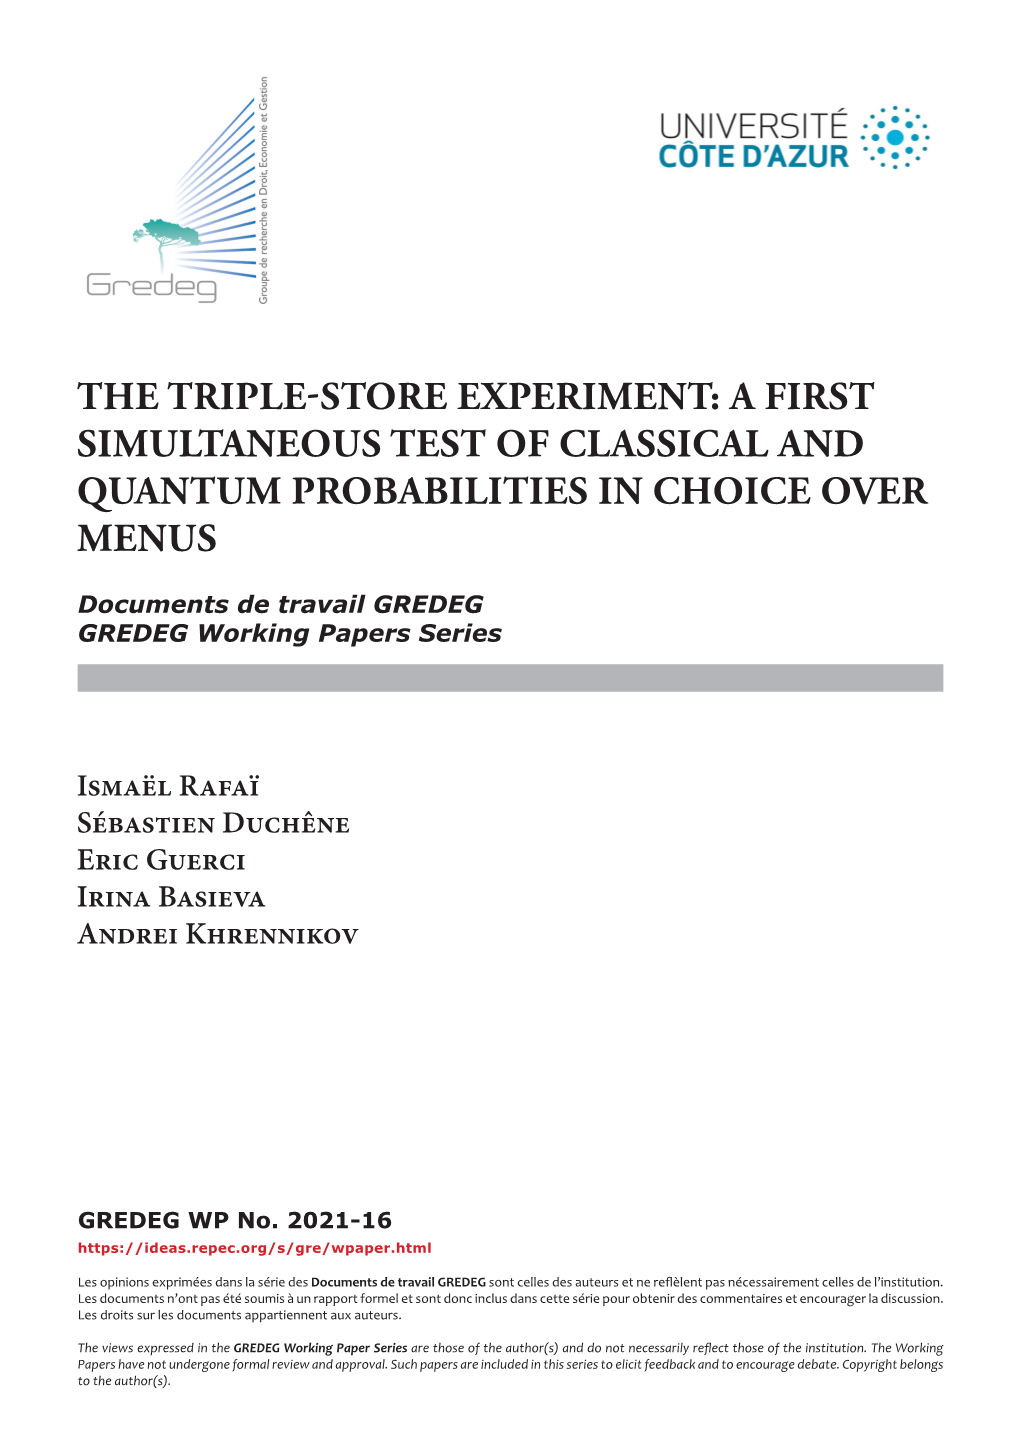 The Triple-Store Experiment: a First Simultaneous Test of Classical and Quantum Probabilities in Choice Over Menus